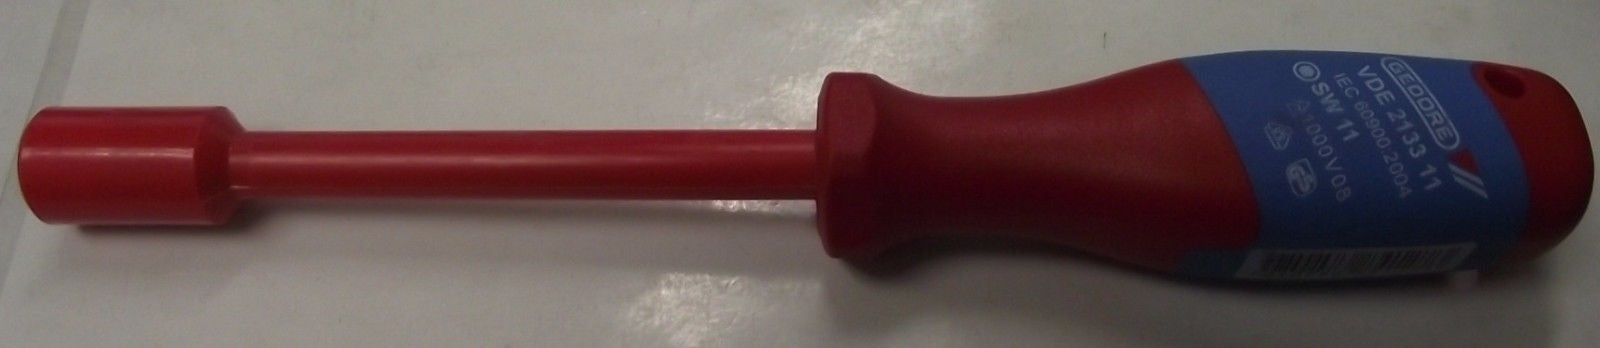 Gedore VDE 2133 11 VDE Insulated Socket Wrench With Handle 11 mm